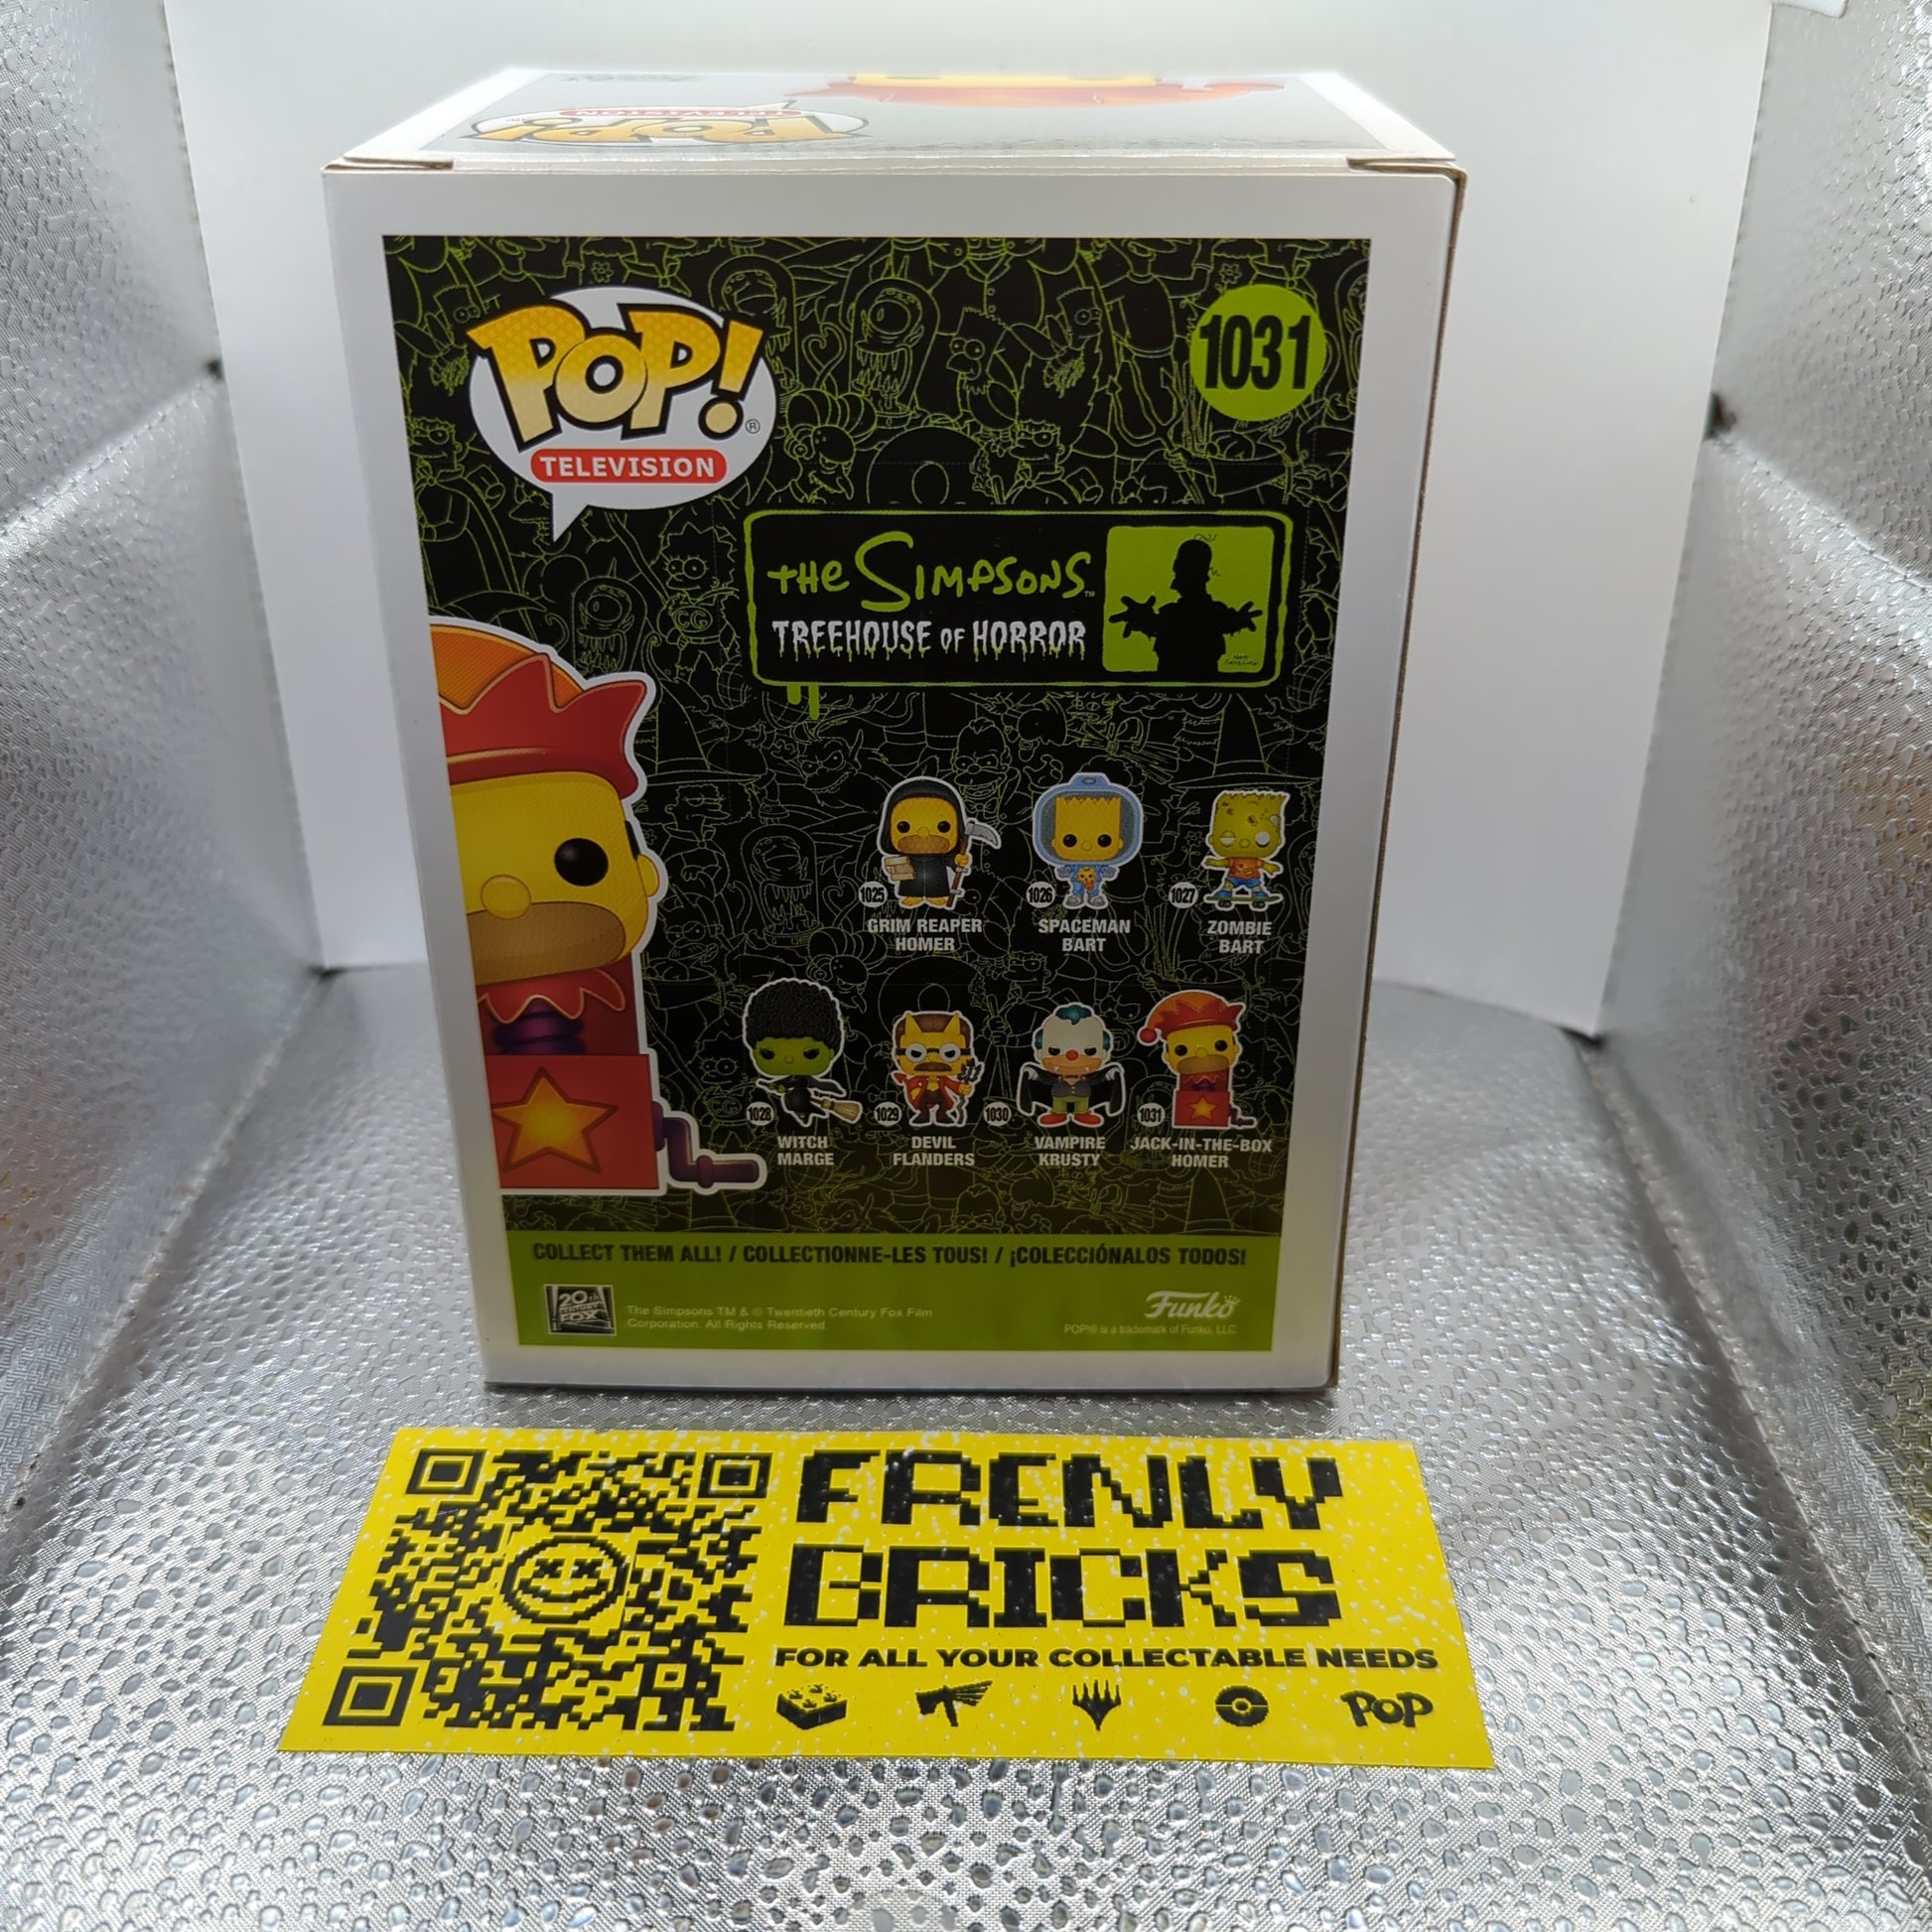 PoP! Television The Simpsons Treehouse of Horror Jack in the Box Homer 1031 Glow FRENLY BRICKS - Open 7 Days